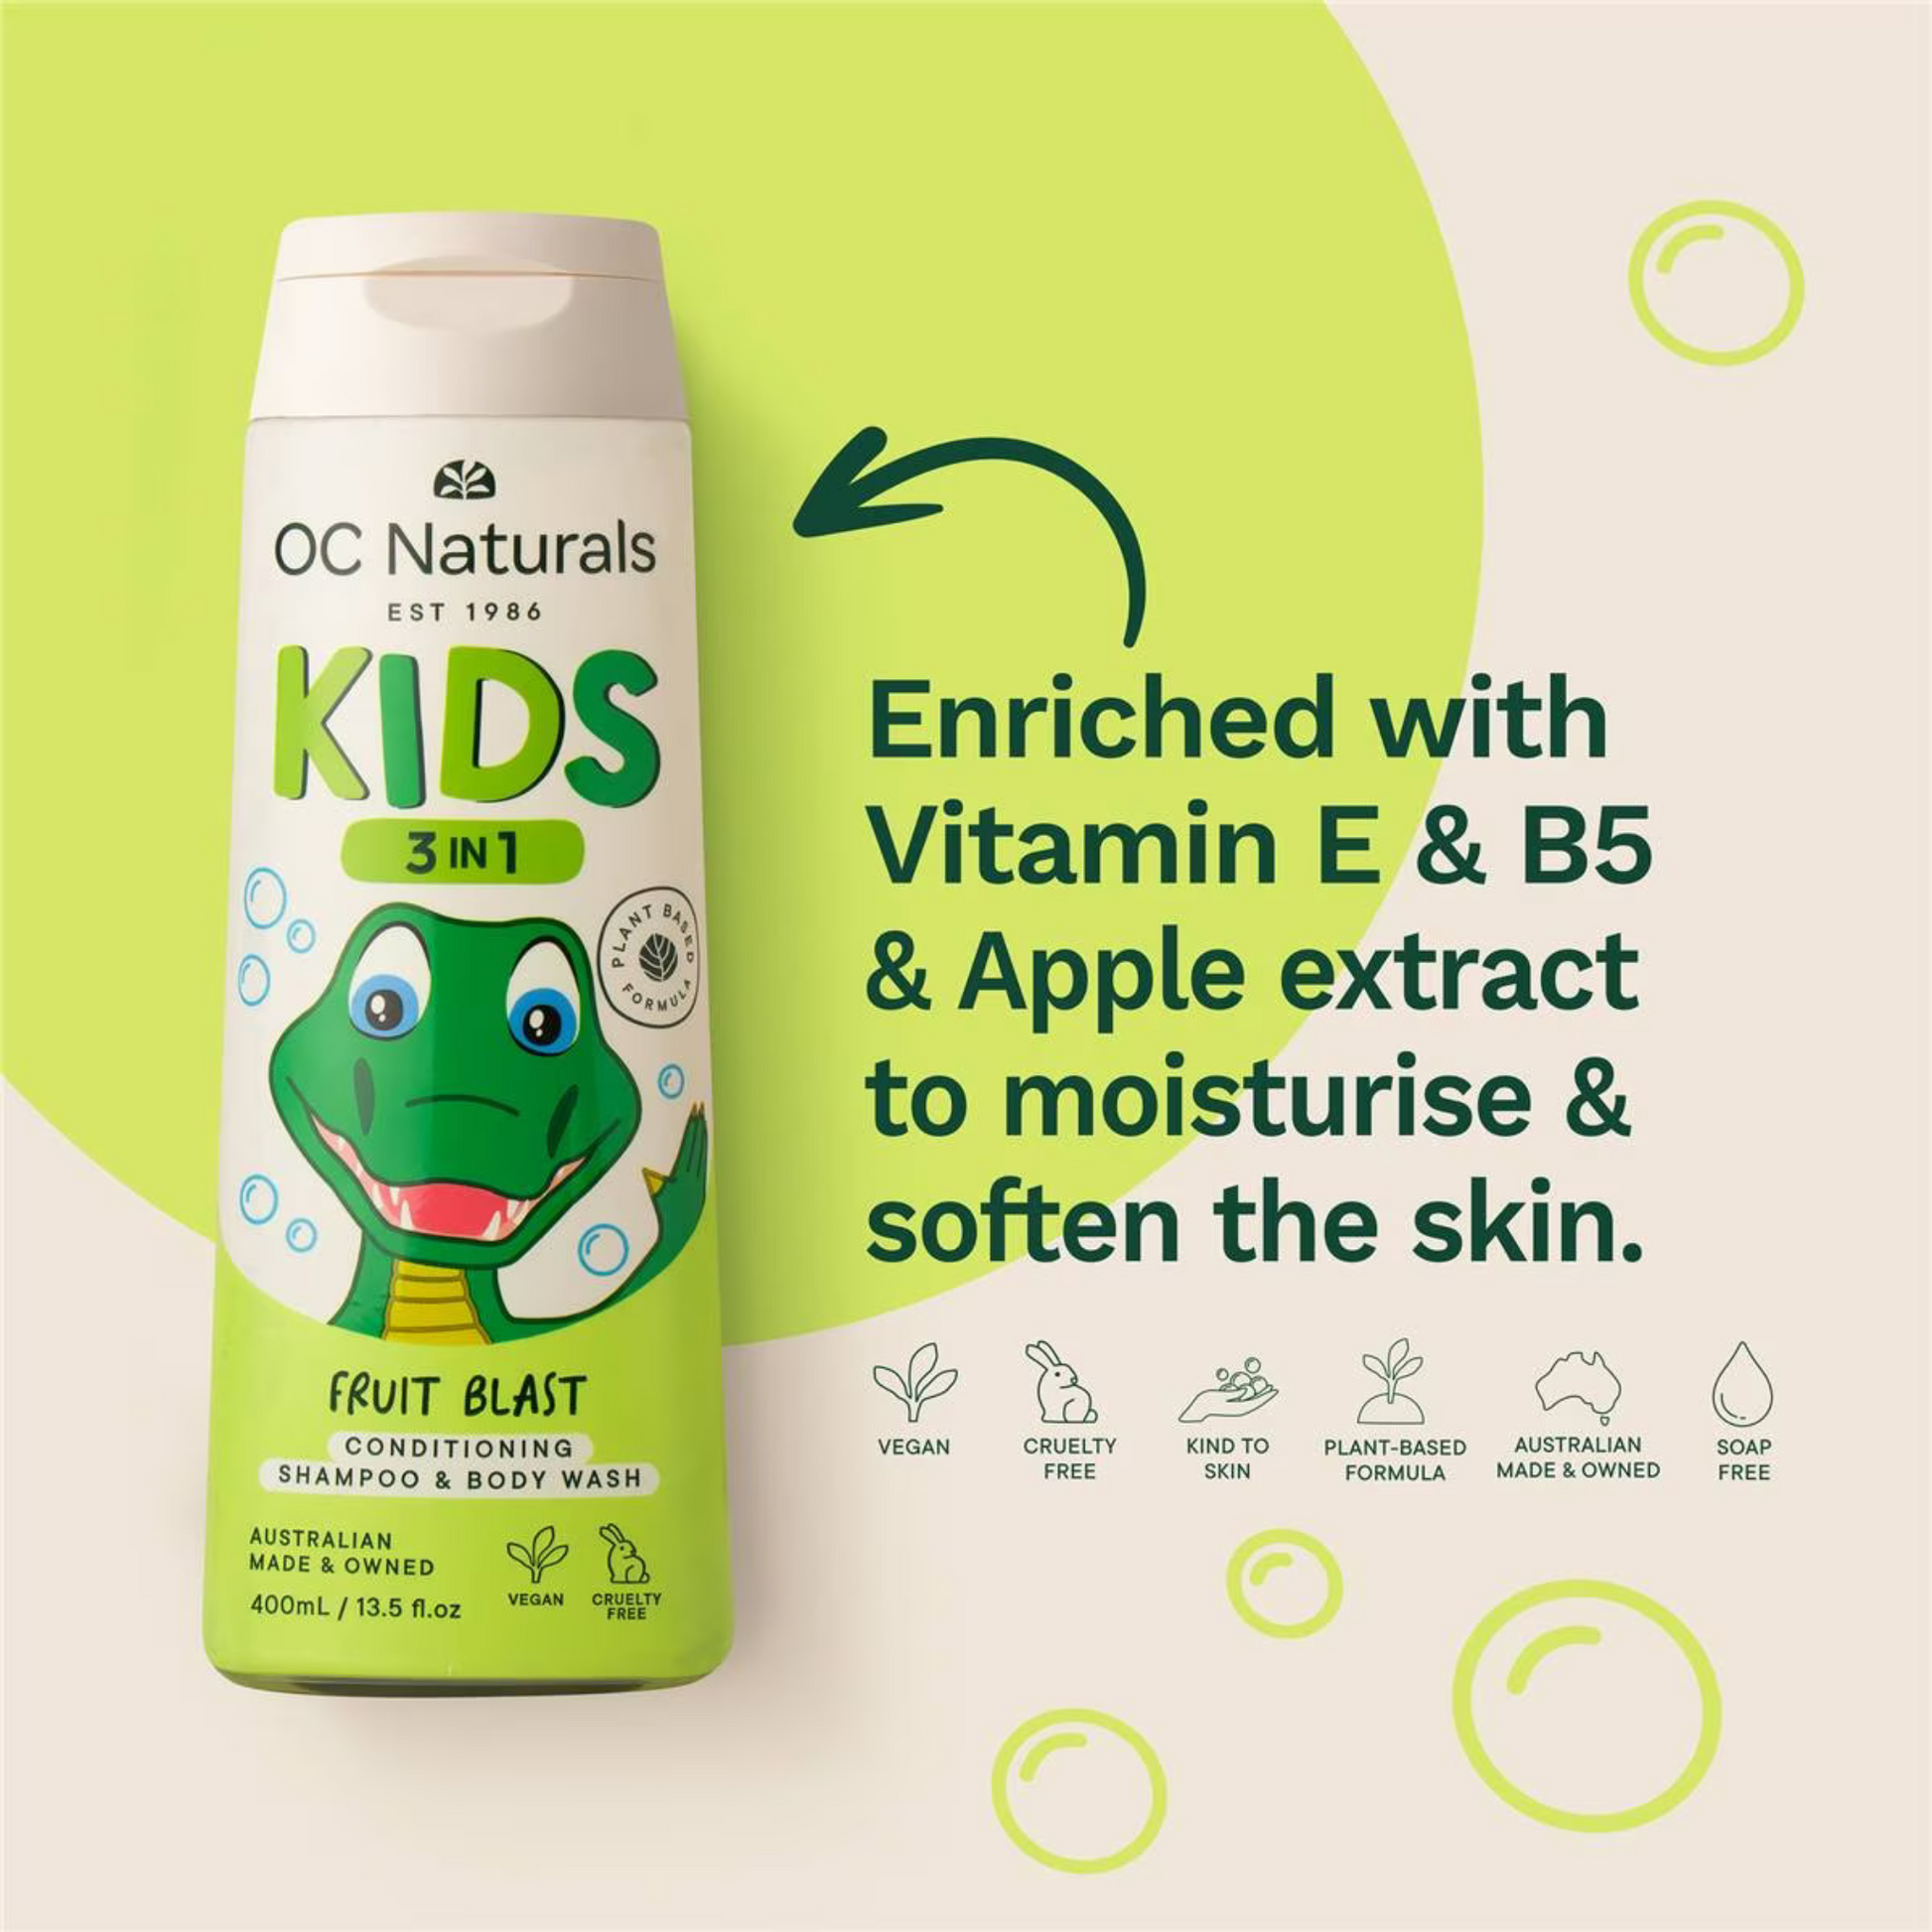 Organic Care Naturals Kids 3 in 1 Shampoo & Body Wash Fruit Blast has plant derived ingredients. Enriched with Vitamin E & B5, it contains no chemicals that harm your child's sensitive skin. Leaves skin soft & smooth. Best foreign kid's children body wash bathing genuine Australian imported price in Dhaka Bangladesh.